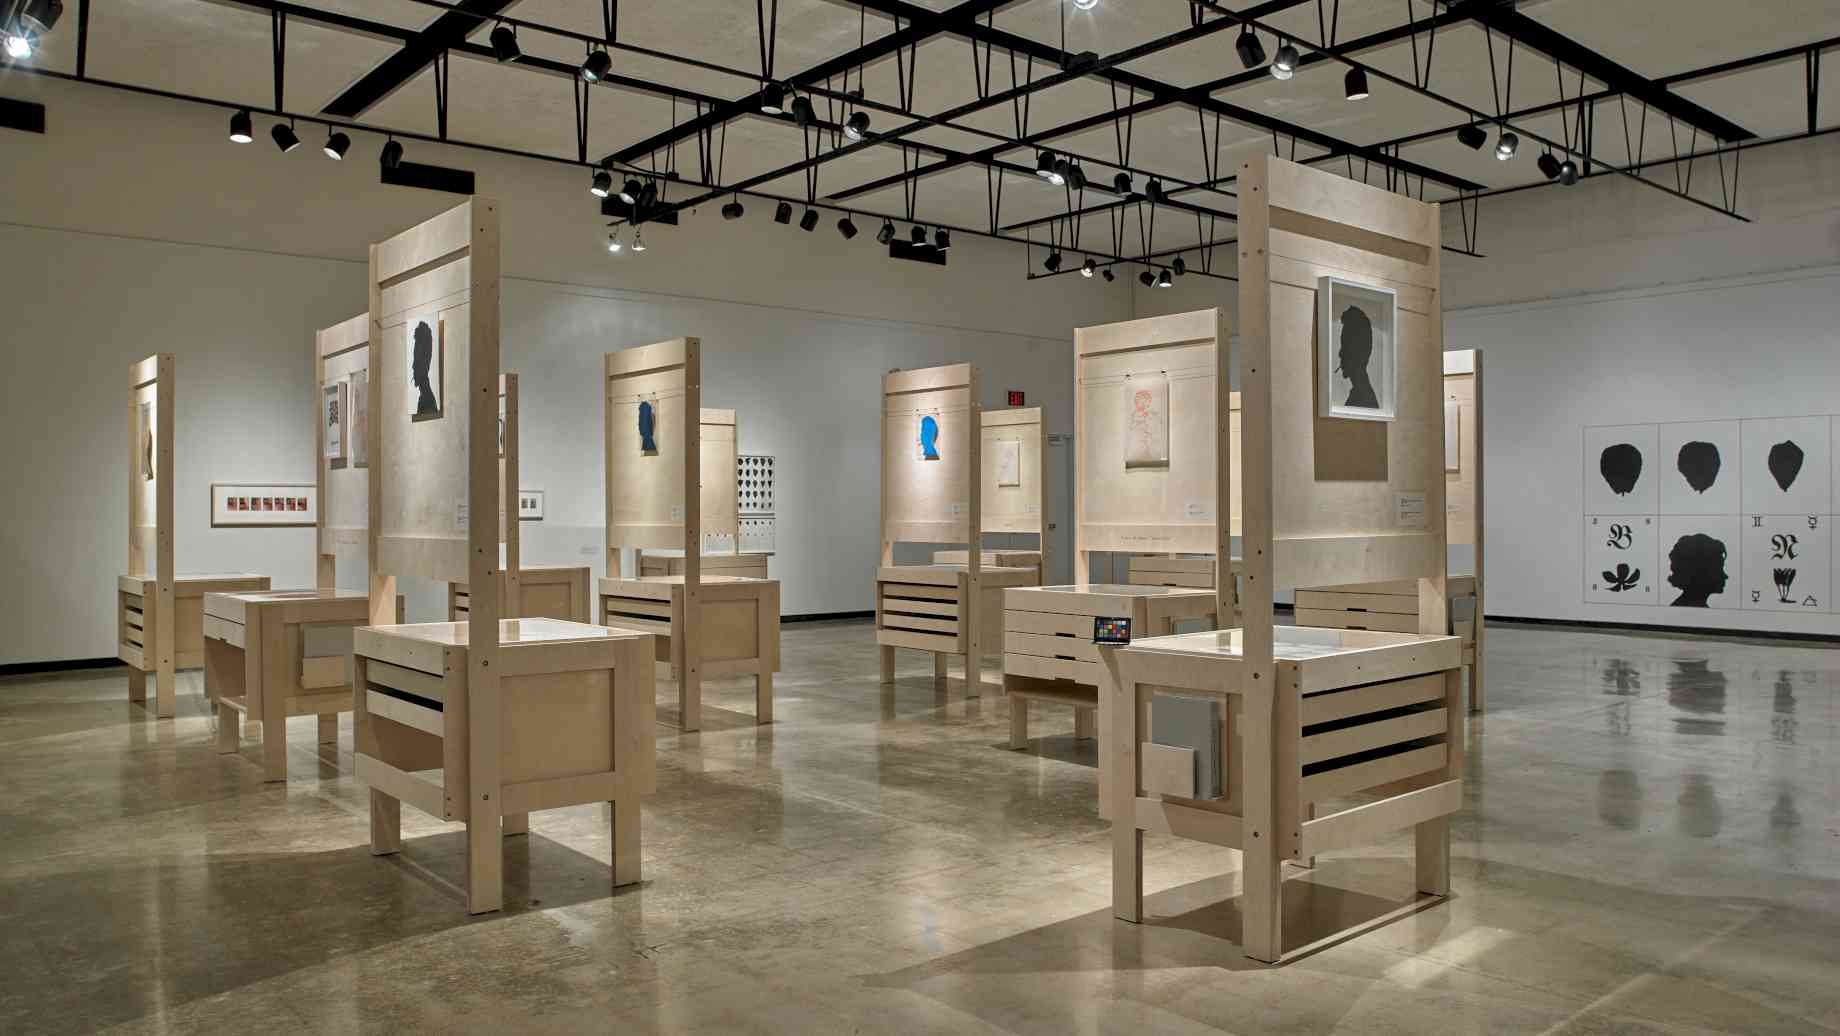 Exhibition in the University Gallery. Photo credit: UF University Galleries. [Alt text: Wooden desks are arranged in a large room, displaying silhouettes of faces.]